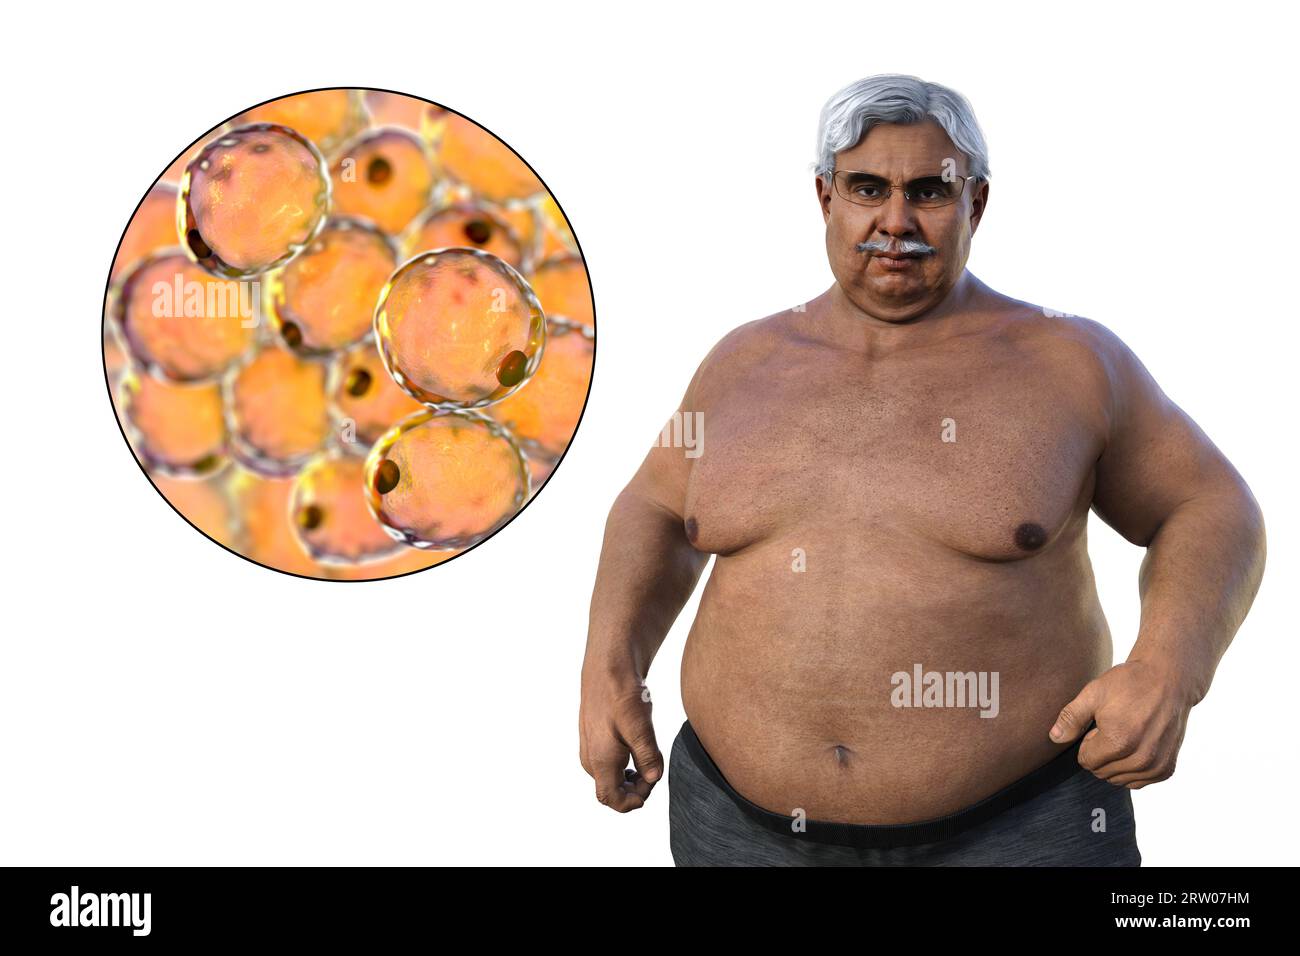 Overweight man with adipocytes, illustration Stock Photo